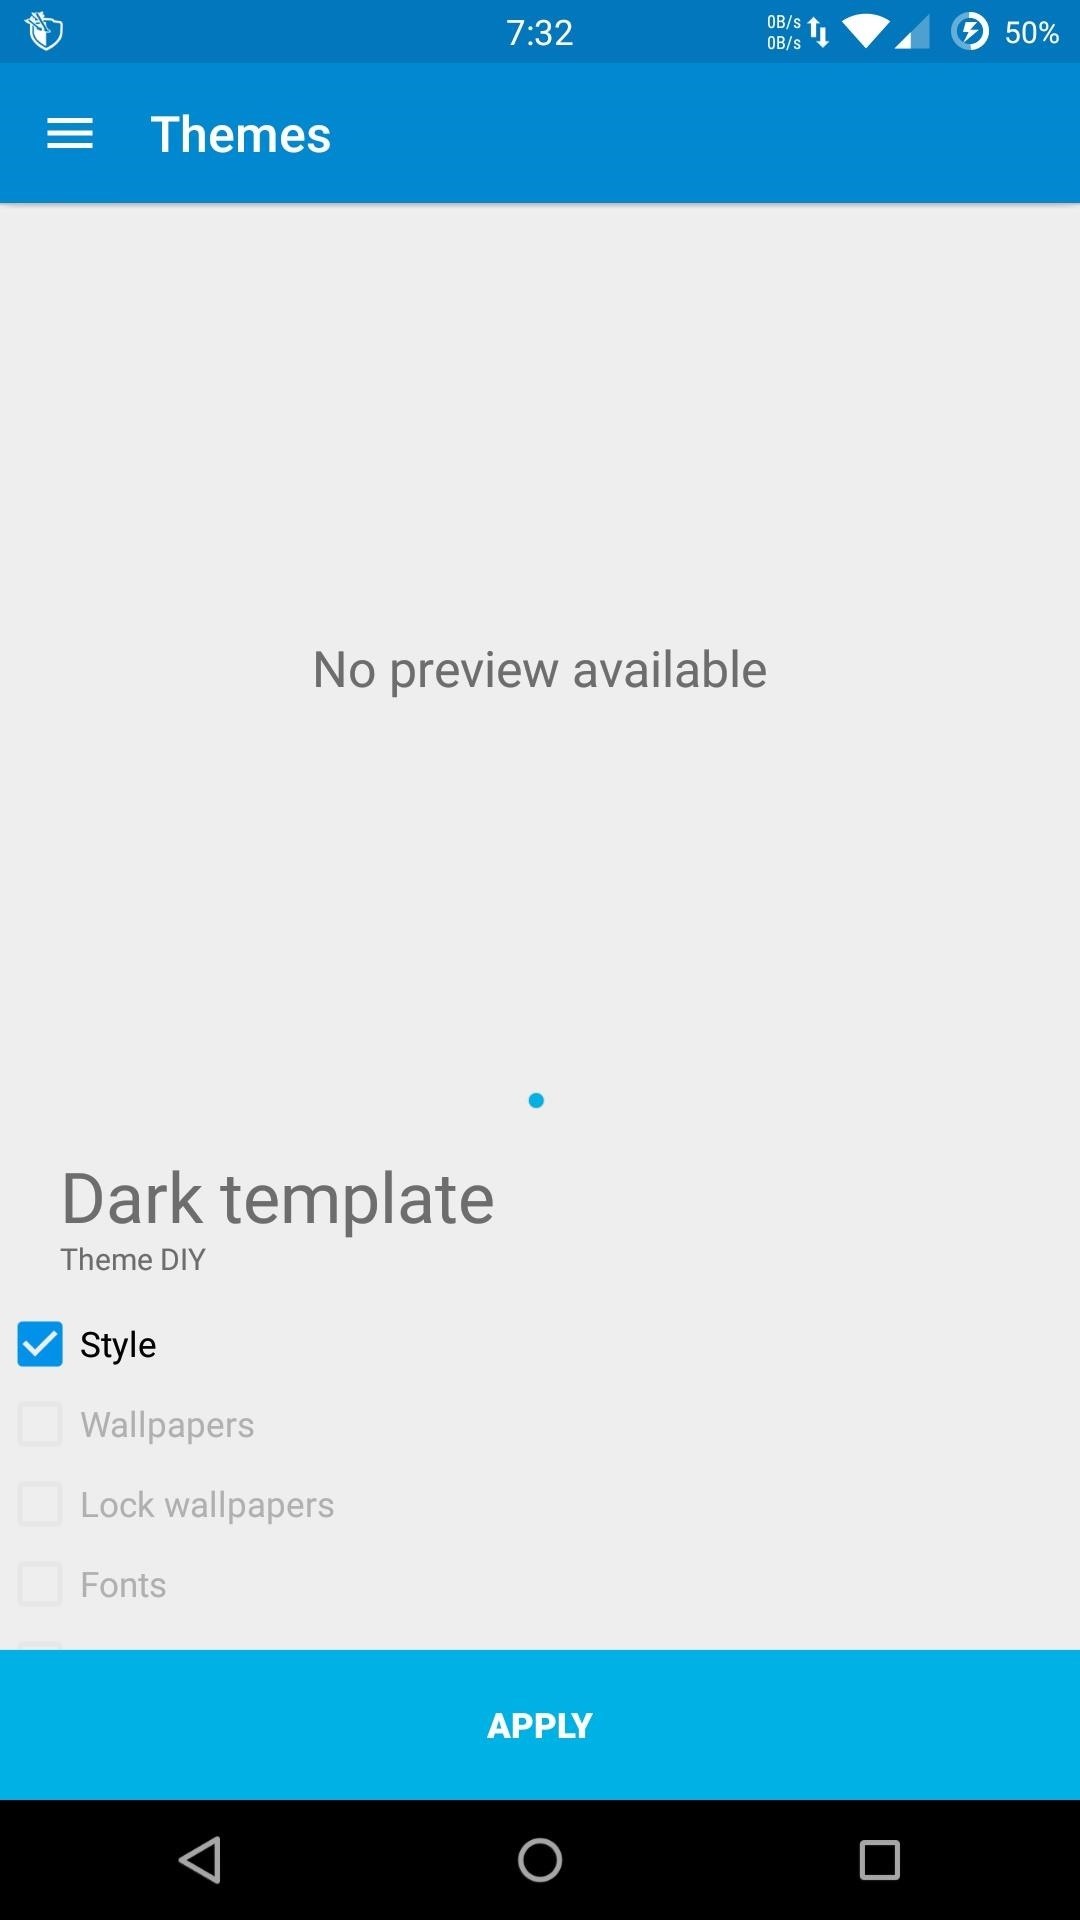 Create Your Own CyanogenMod Theme in Just a Few Easy Taps